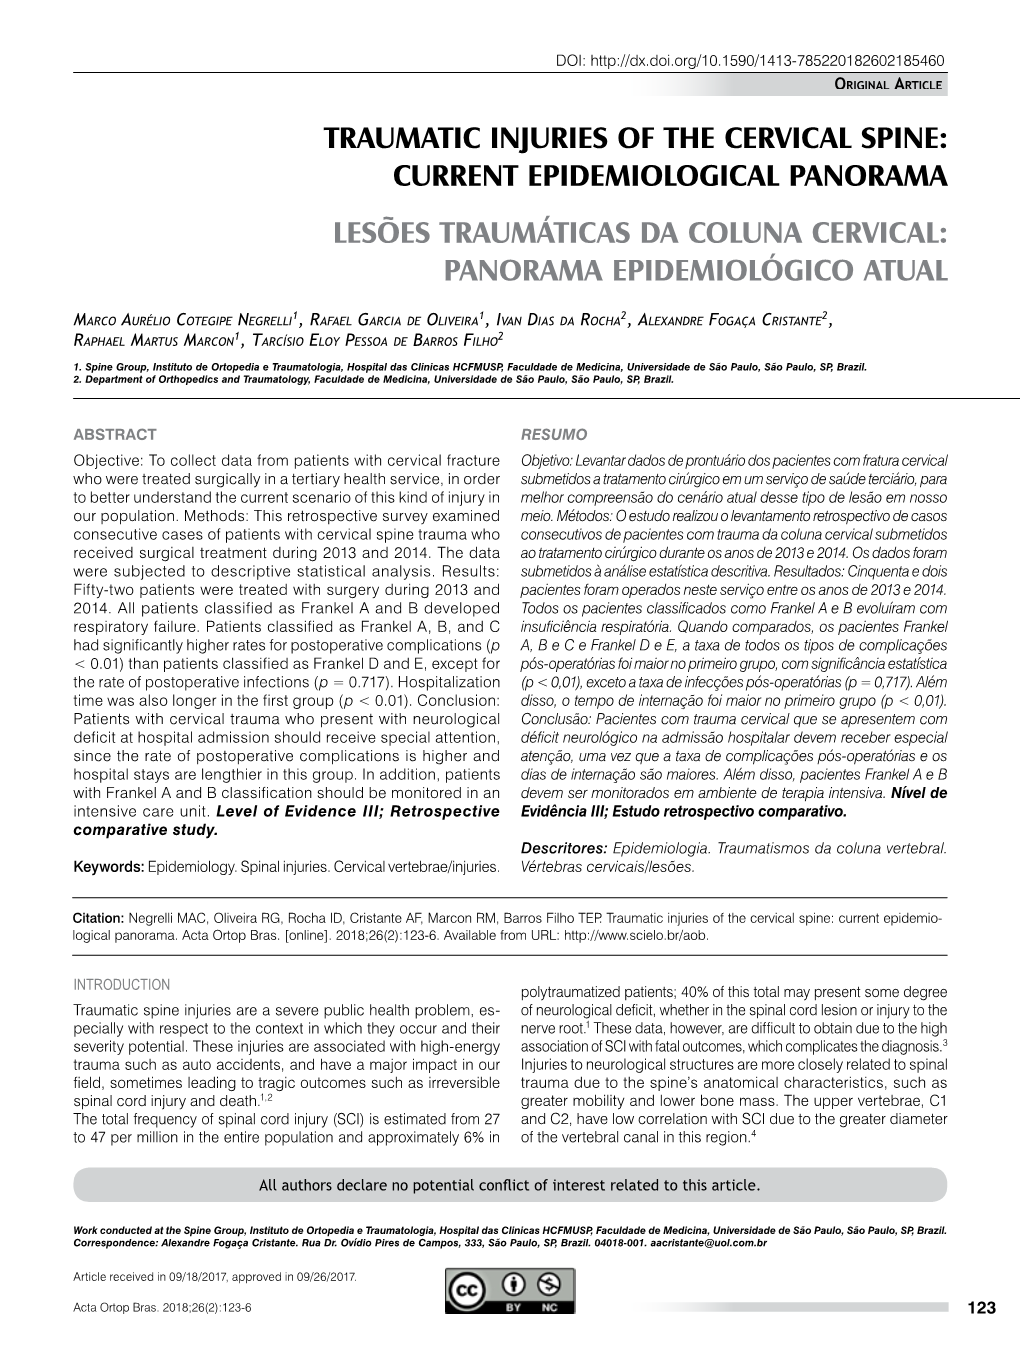 Traumatic Injuries of the Cervical Spine: Current Epidemiological Panorama Lesões Traumáticas Da Coluna Cervical: Panorama Epidemiológico Atual